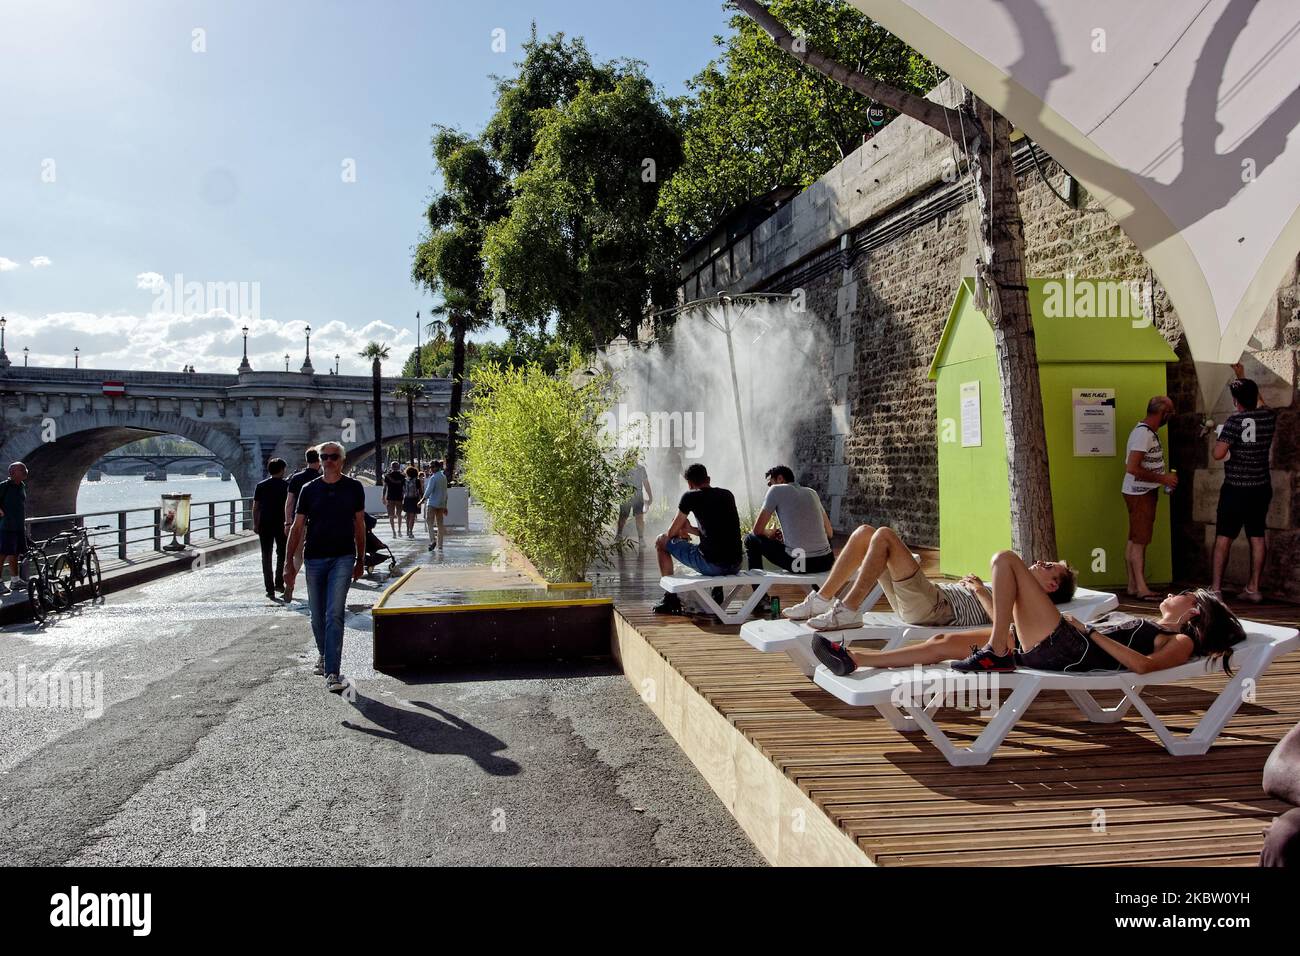 Opening of the event ''Paris-Plages'' with activities of leisure on the banks of the river ''La Seine''. This summer event from july 18 to august 30 is organized by the city of Paris, France, on July 19, 2020. (Photo by Daniel Pier/NurPhoto) Stock Photo